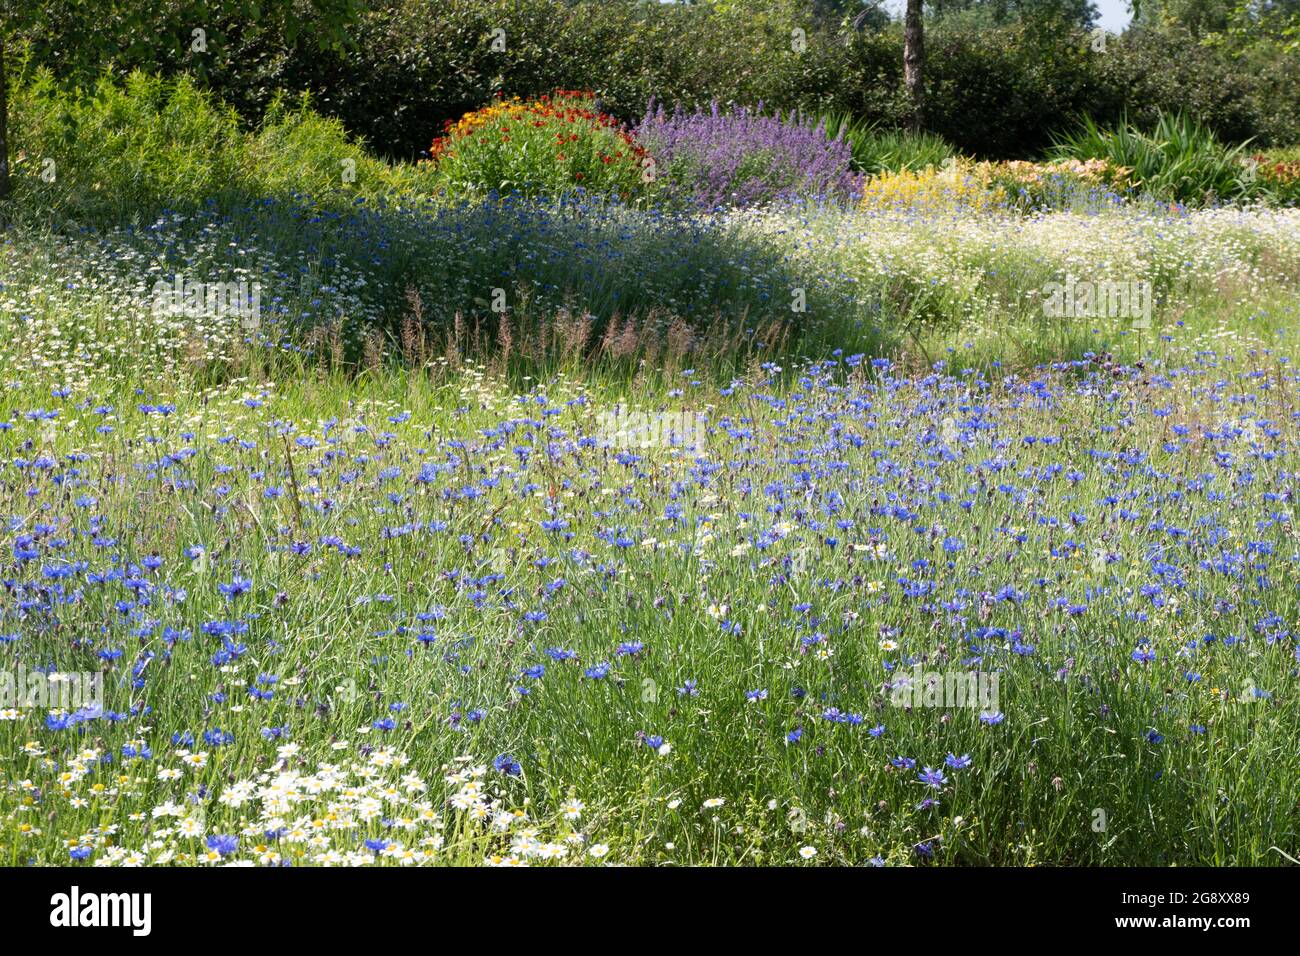 Meadow planting at Breezy Knees gardens Stock Photo